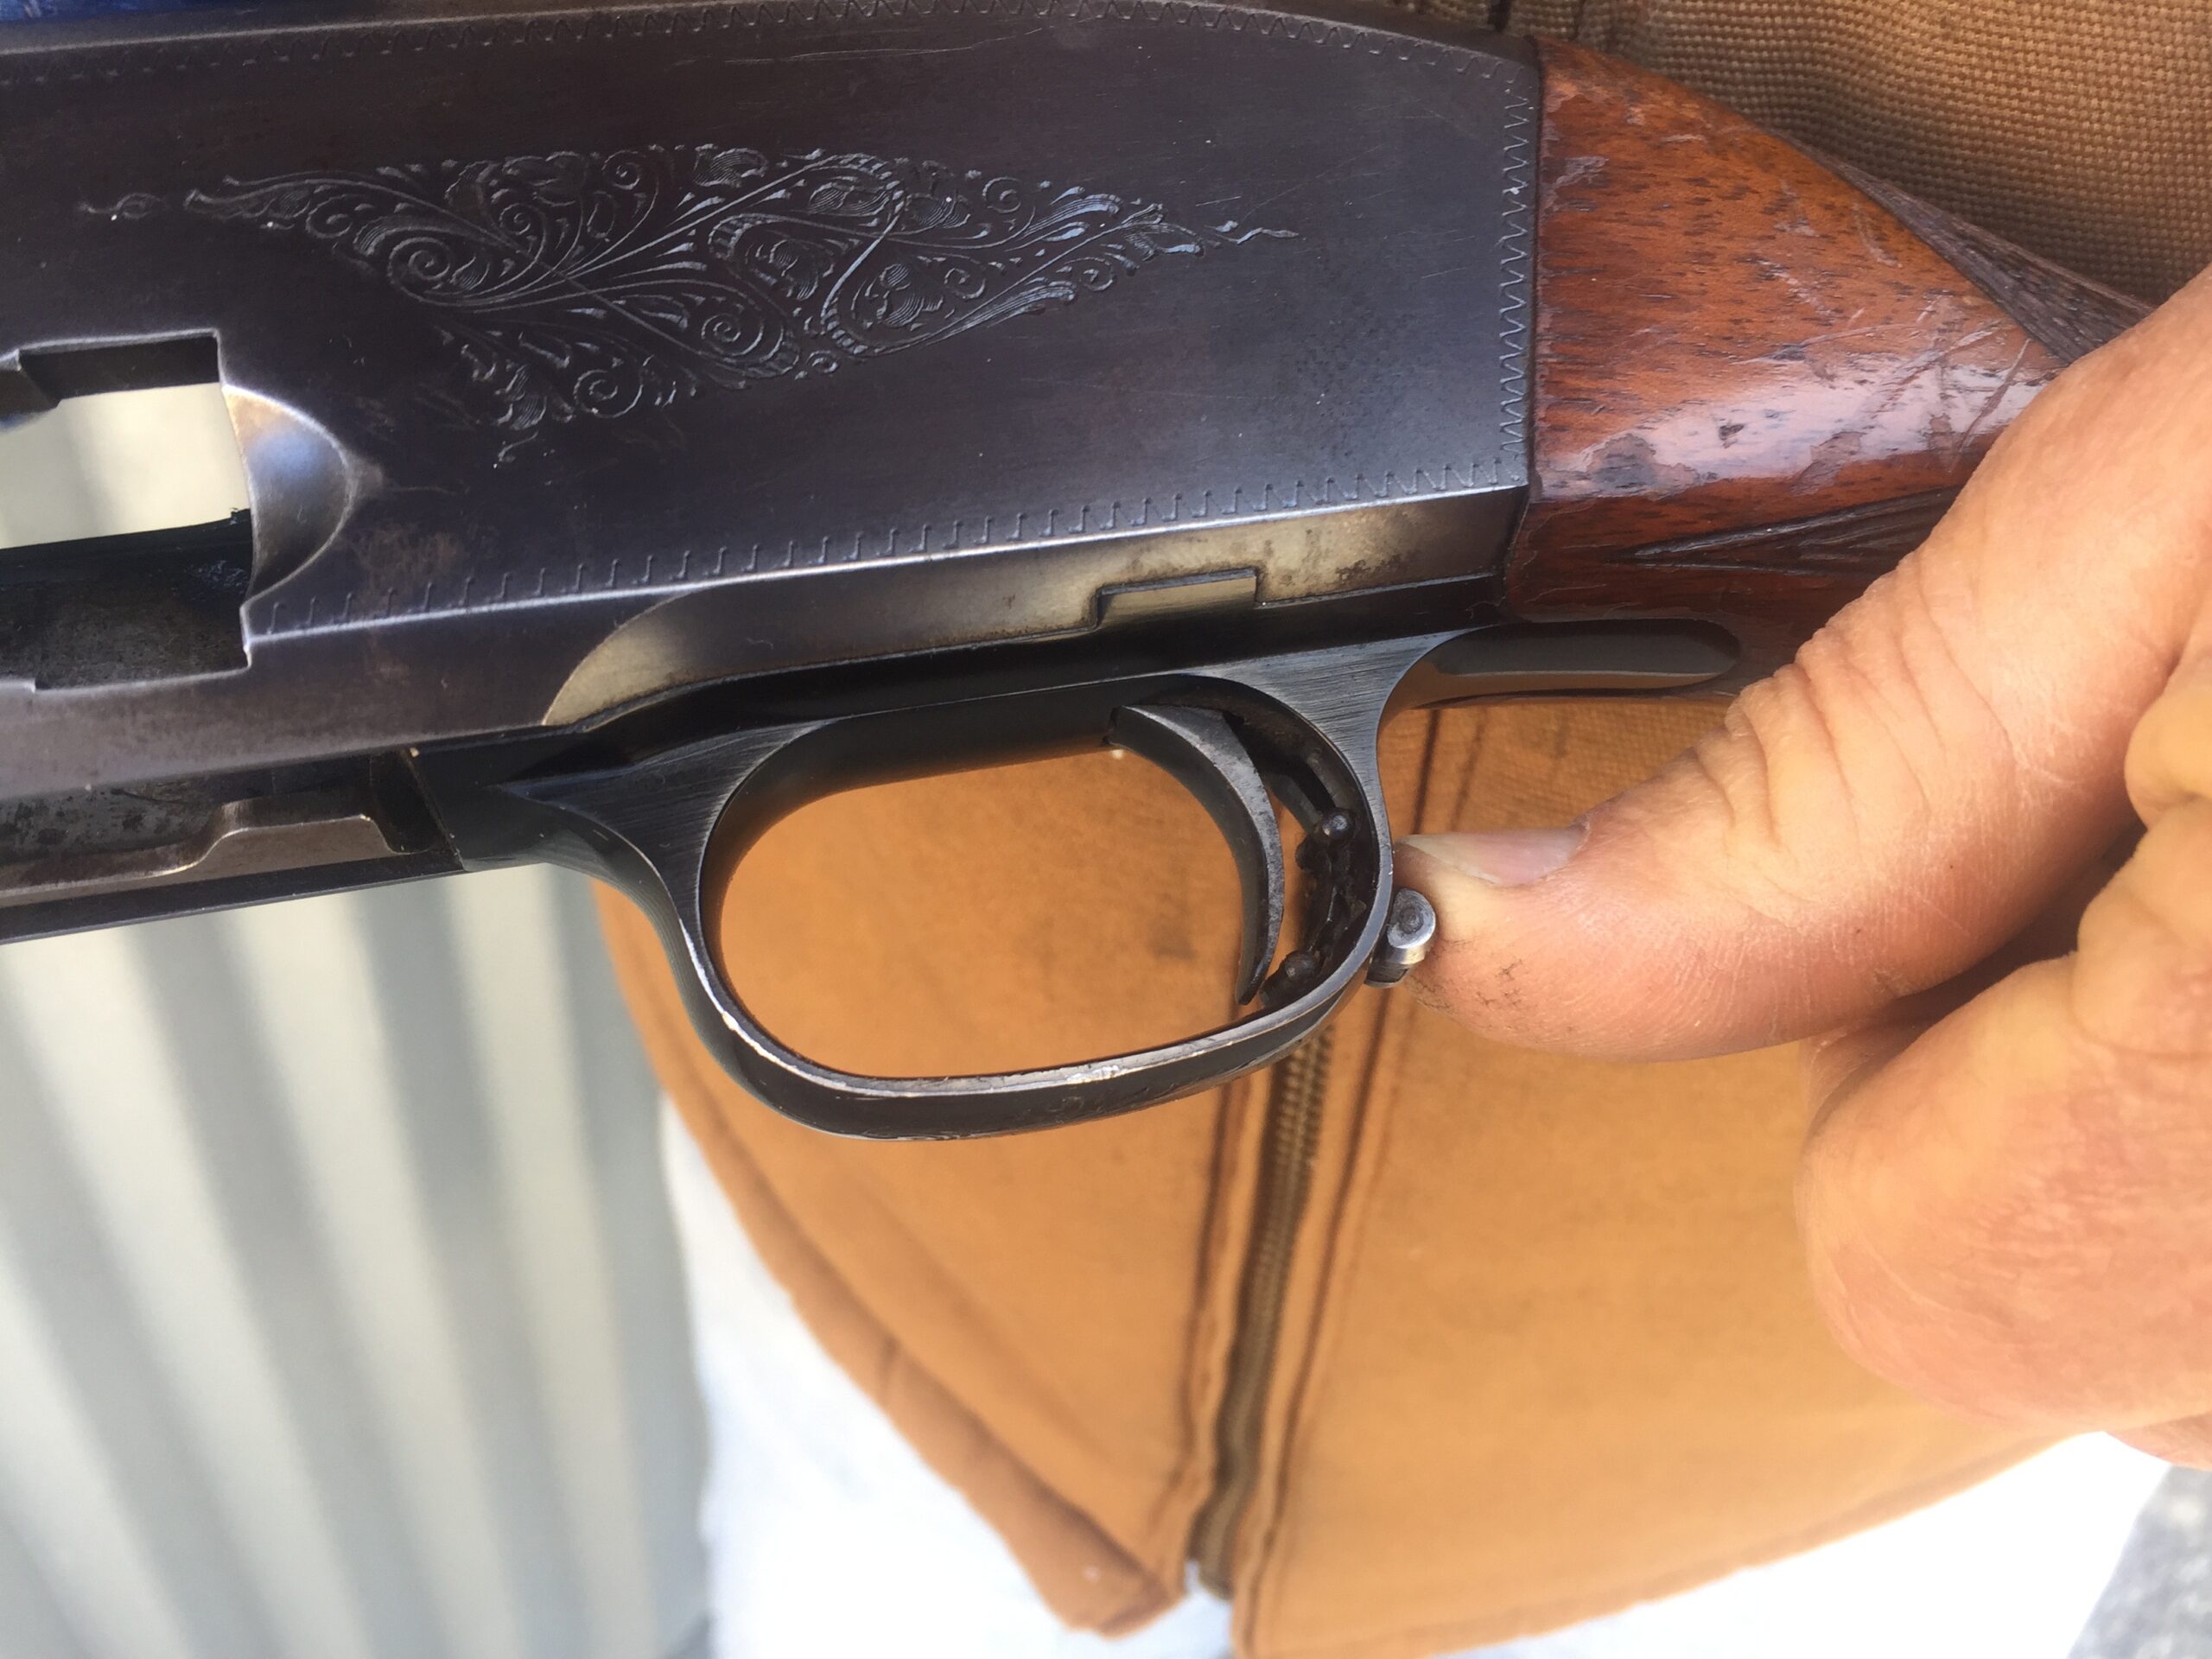 Shooters can find the safety on the rear of the trigger guard.